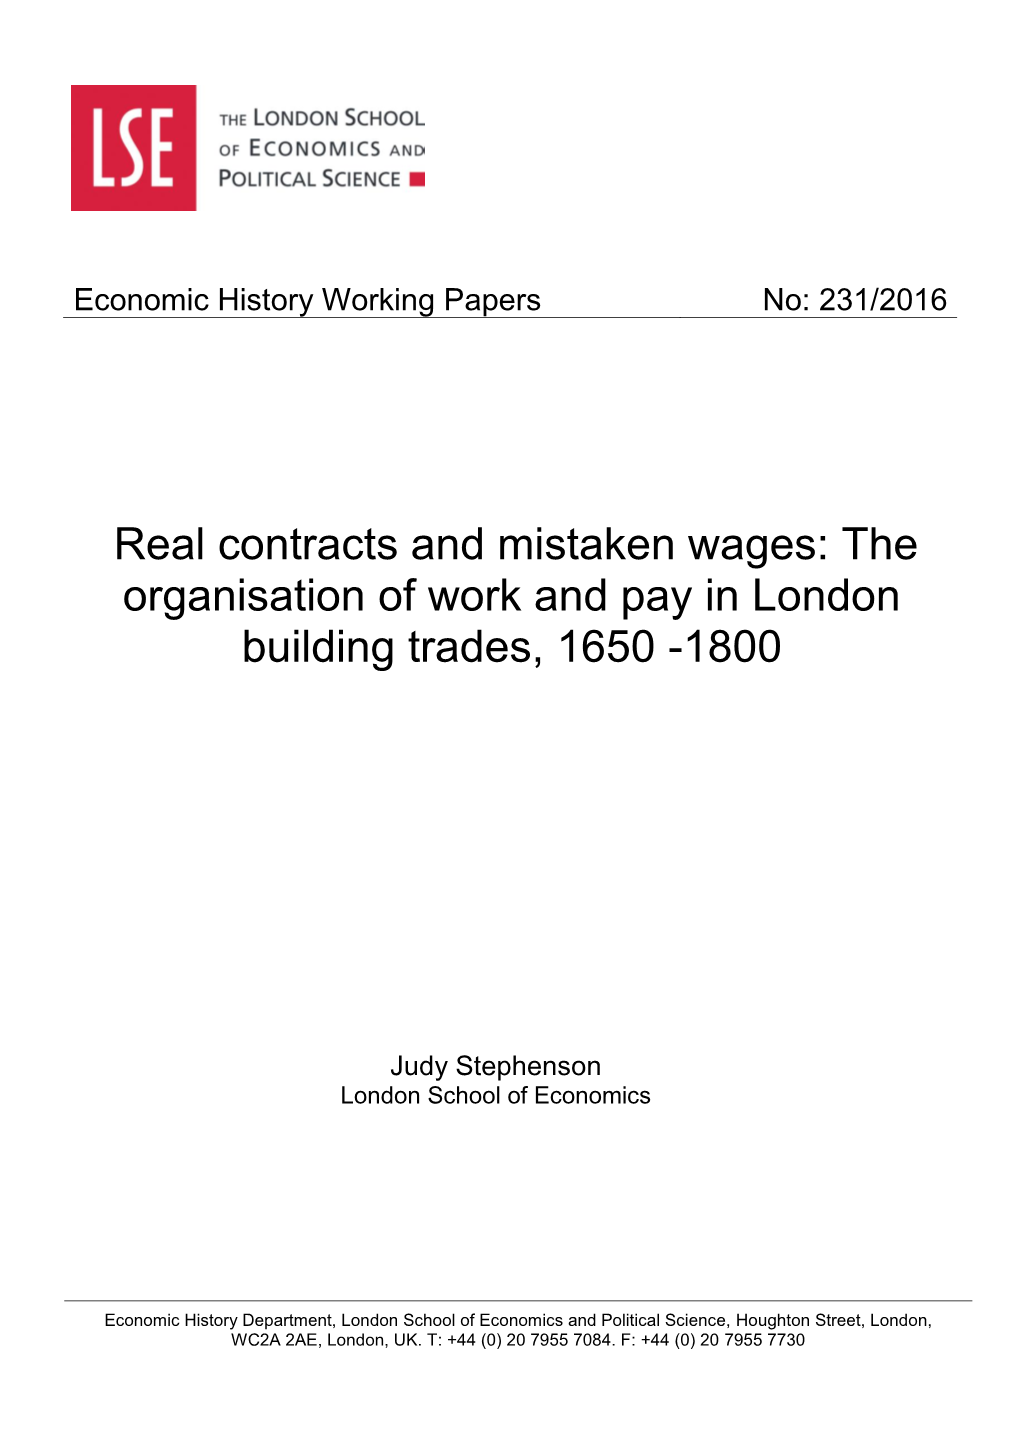 Real Contracts and Mistaken Wages: The